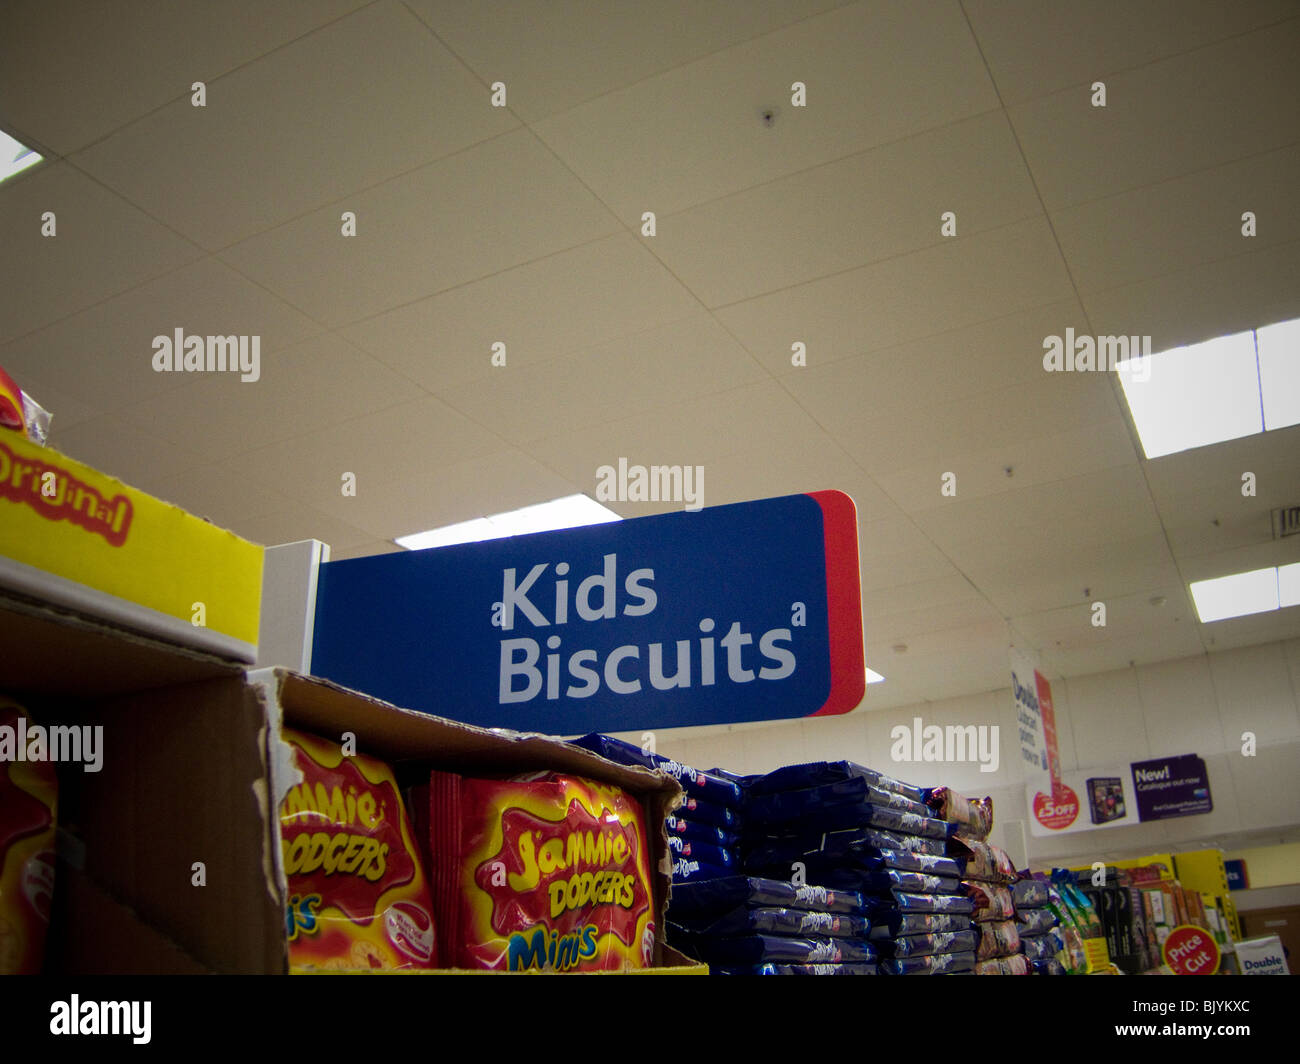 A 'Kids Biscuits' sign in a Tesco store in the UK. Stock Photo